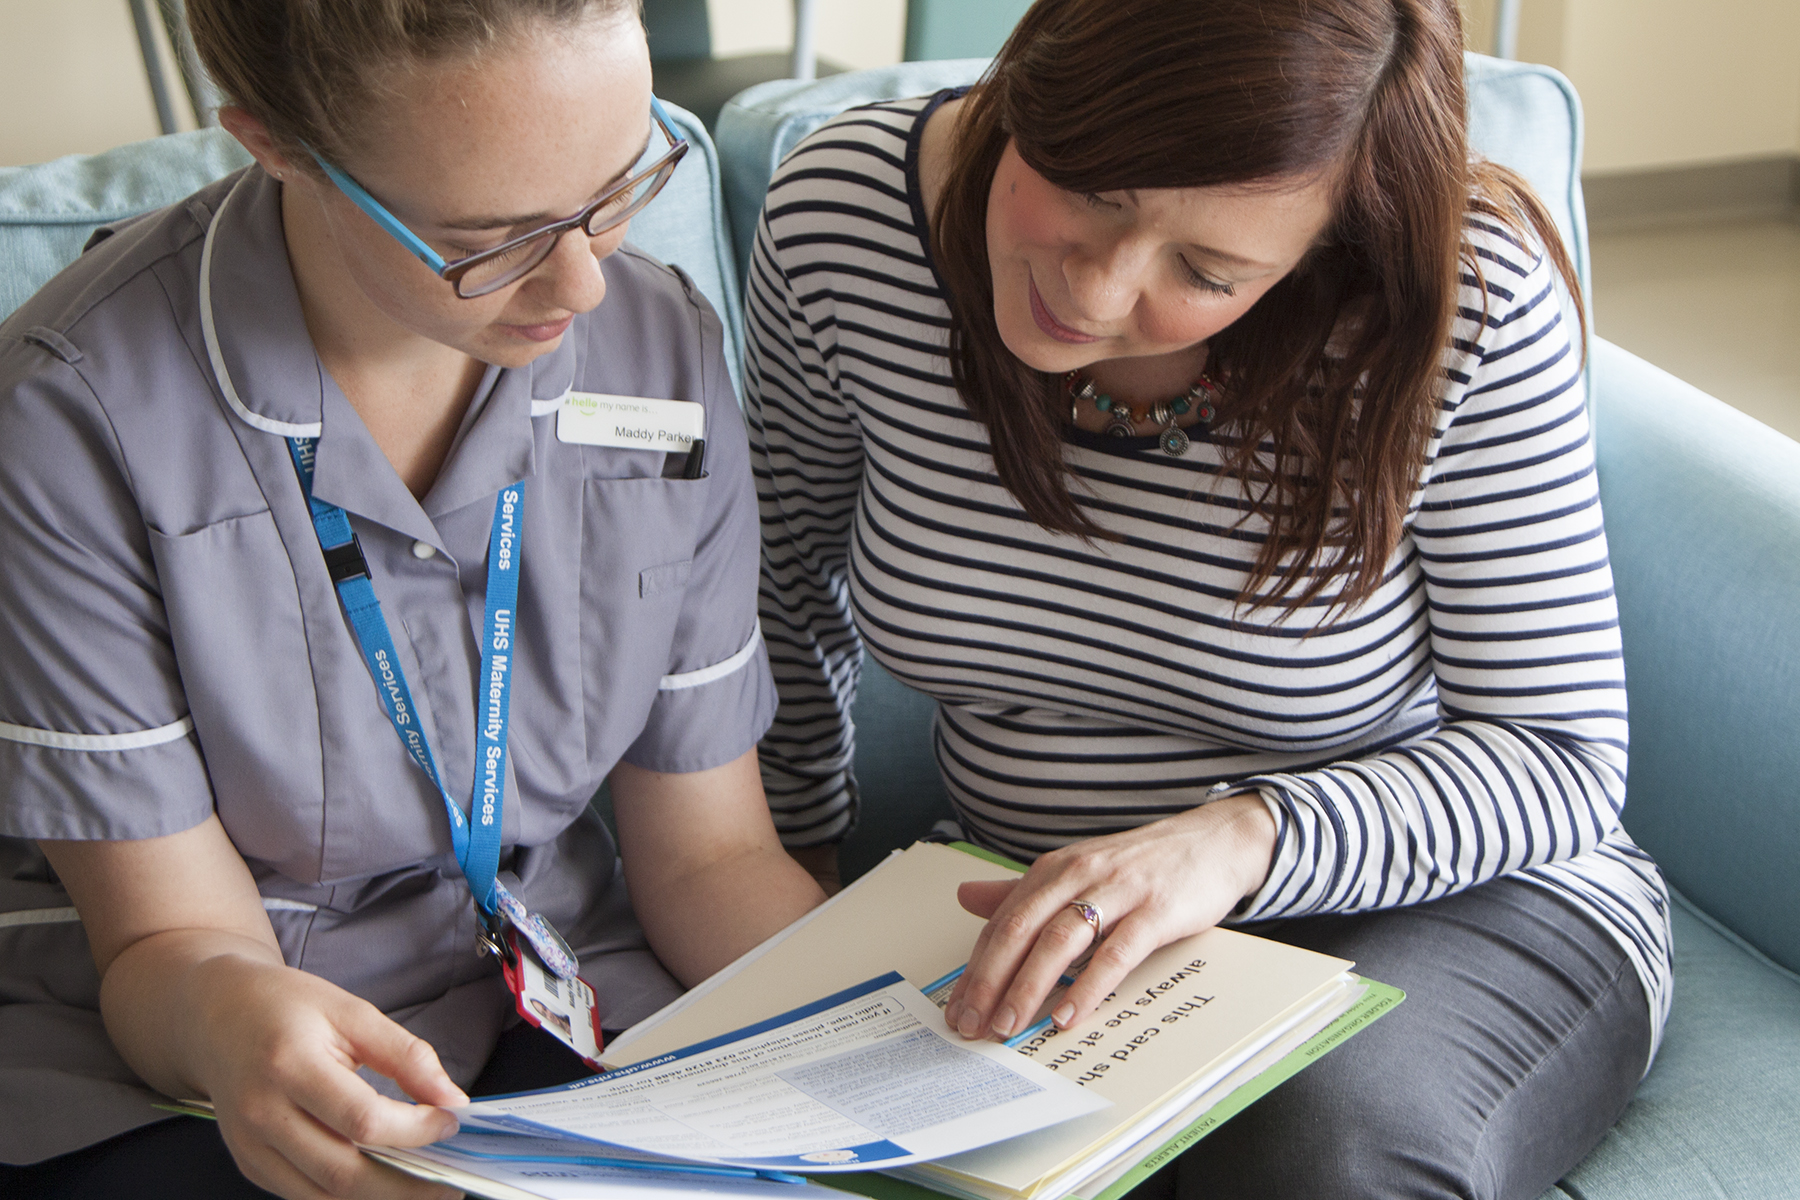 A member of staff and pregnant woman looking at an information sheet